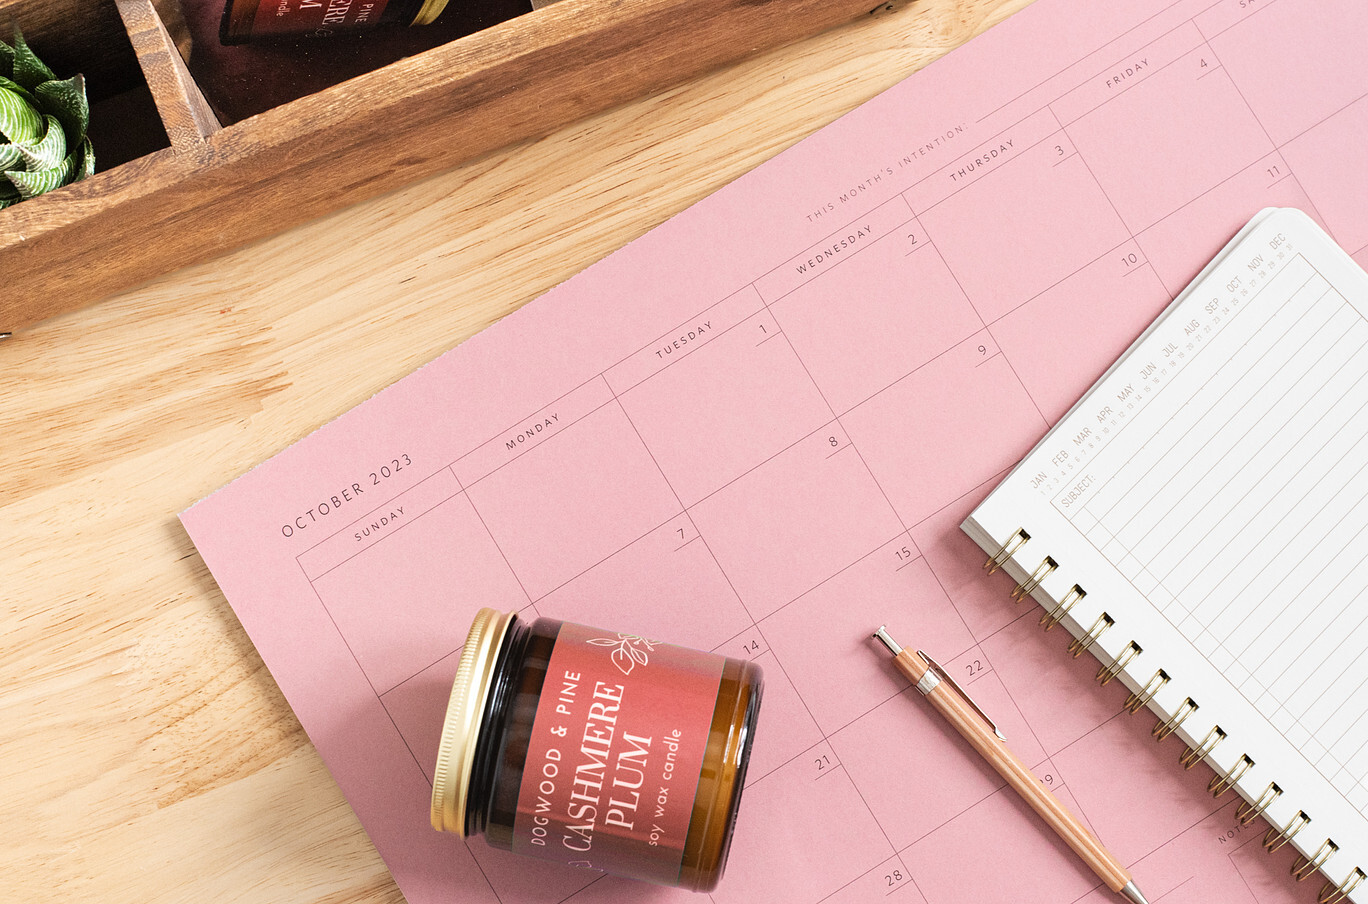 An overhead view of a natural-colored wood desktop. On the desk is a Cashmere Plum candle in a glass amber jar with gold lid; a month-view calendar, a notebook planner, and a wooden pencil.